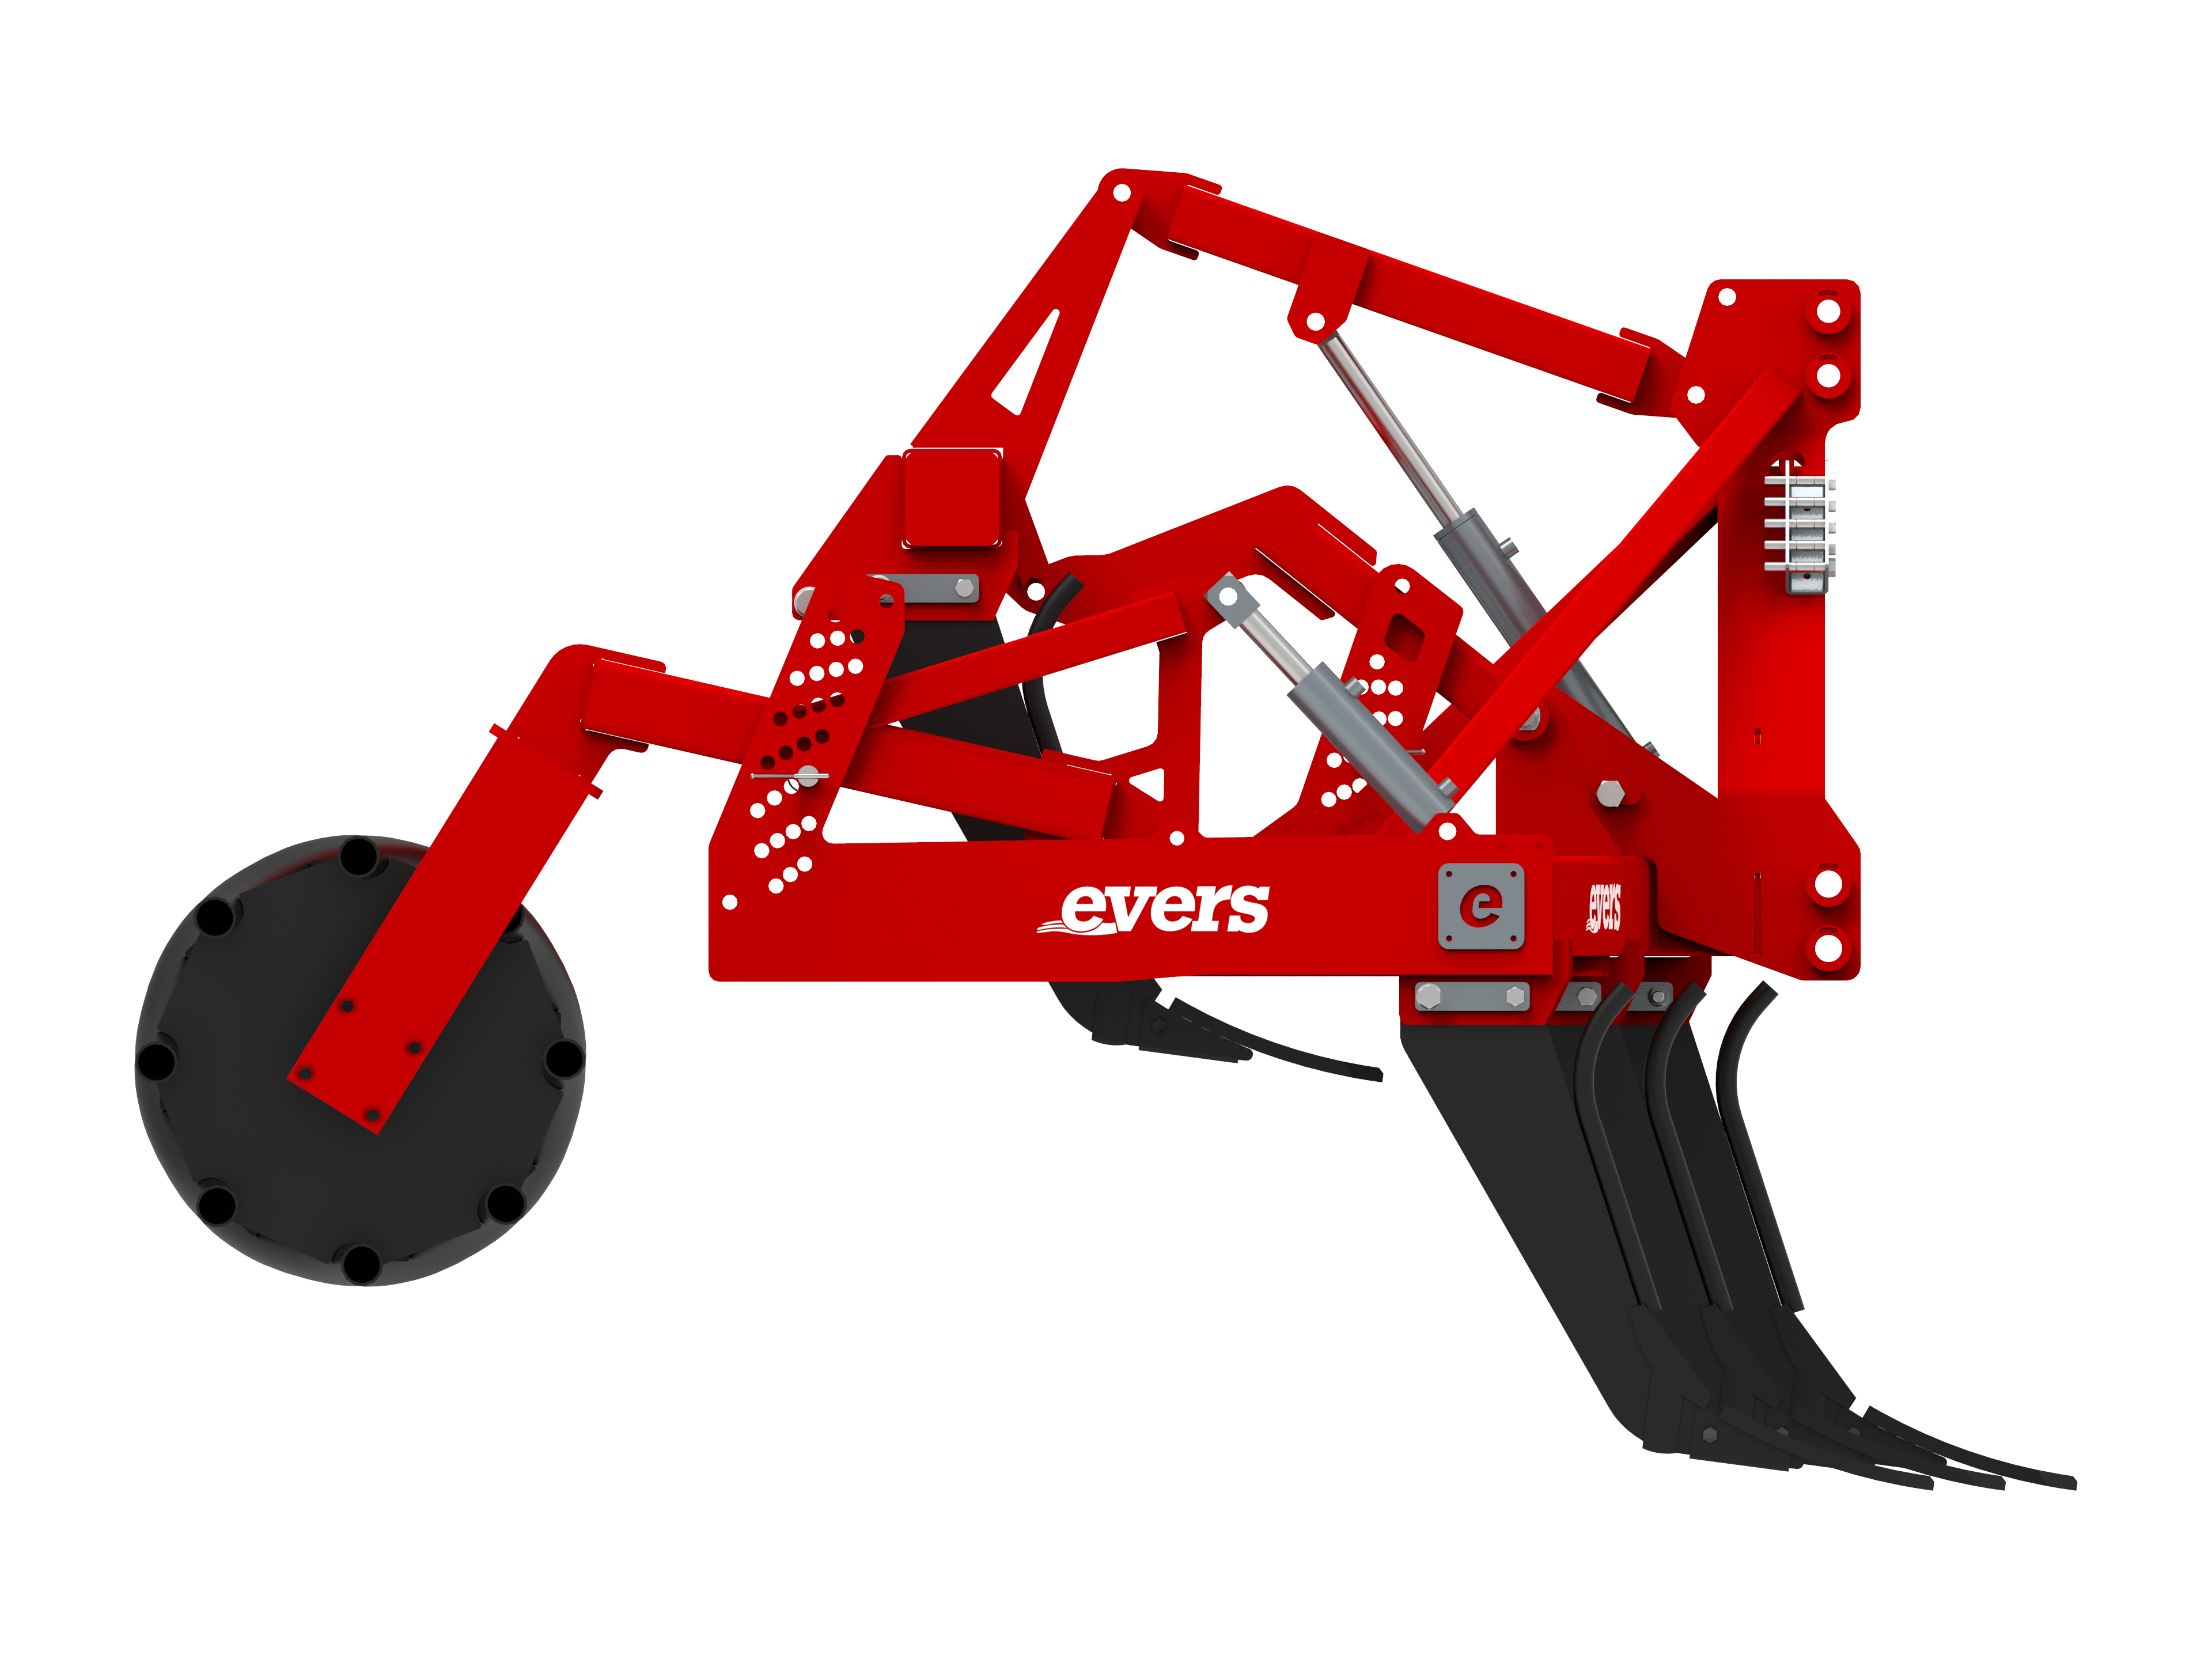 New: Evers Forest  multi-purpose cultivator with slip-dependent depth control